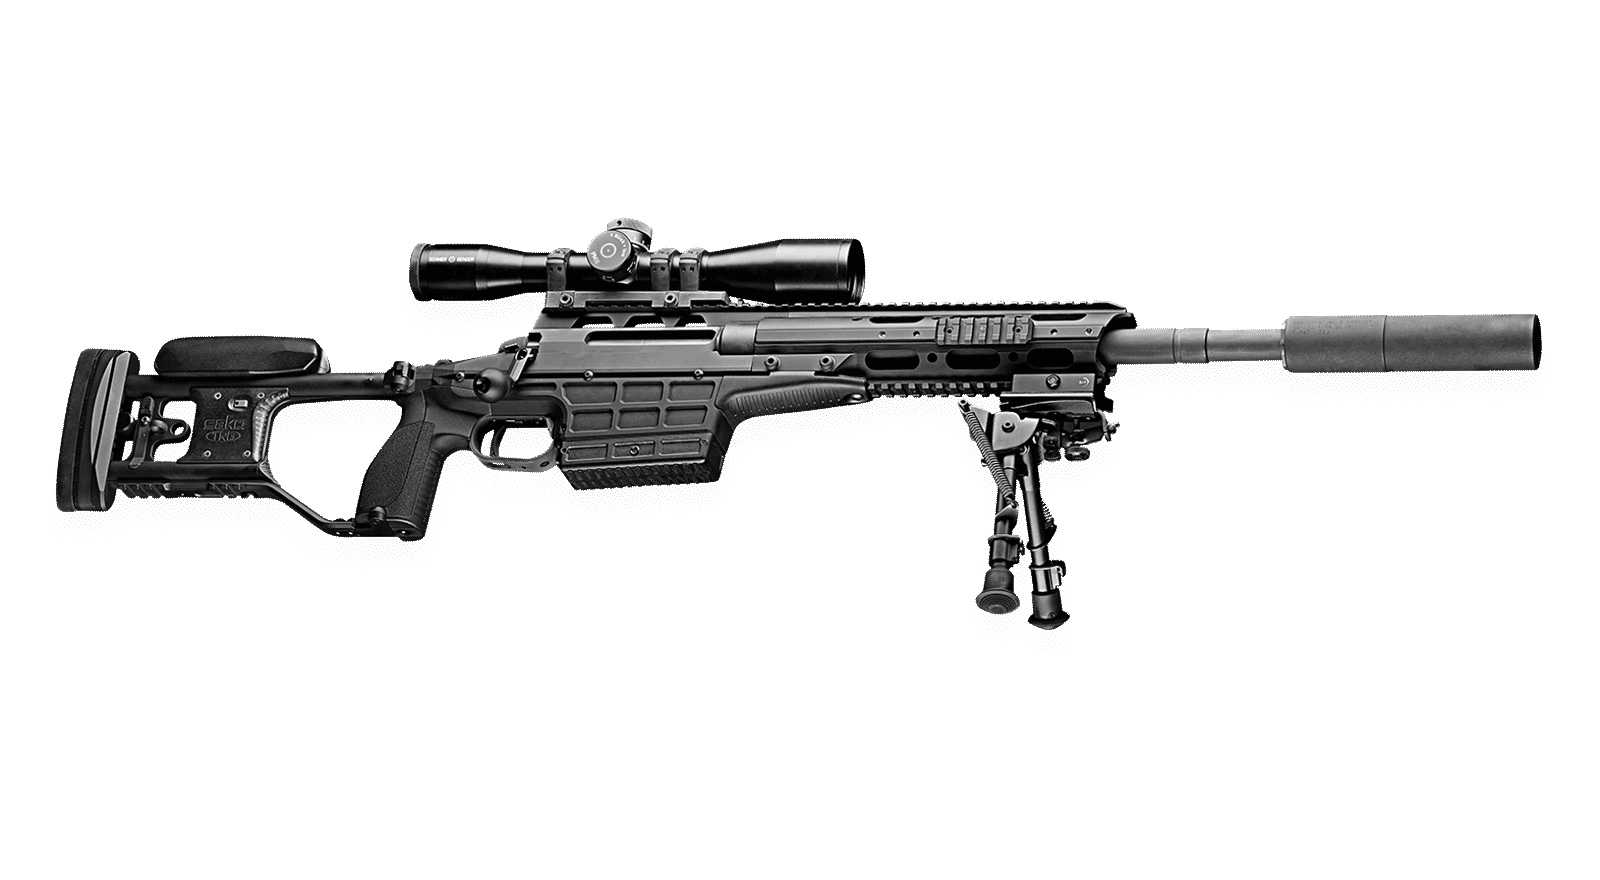 Finnish Defence Forces to receive TRG M10 sniper rifles